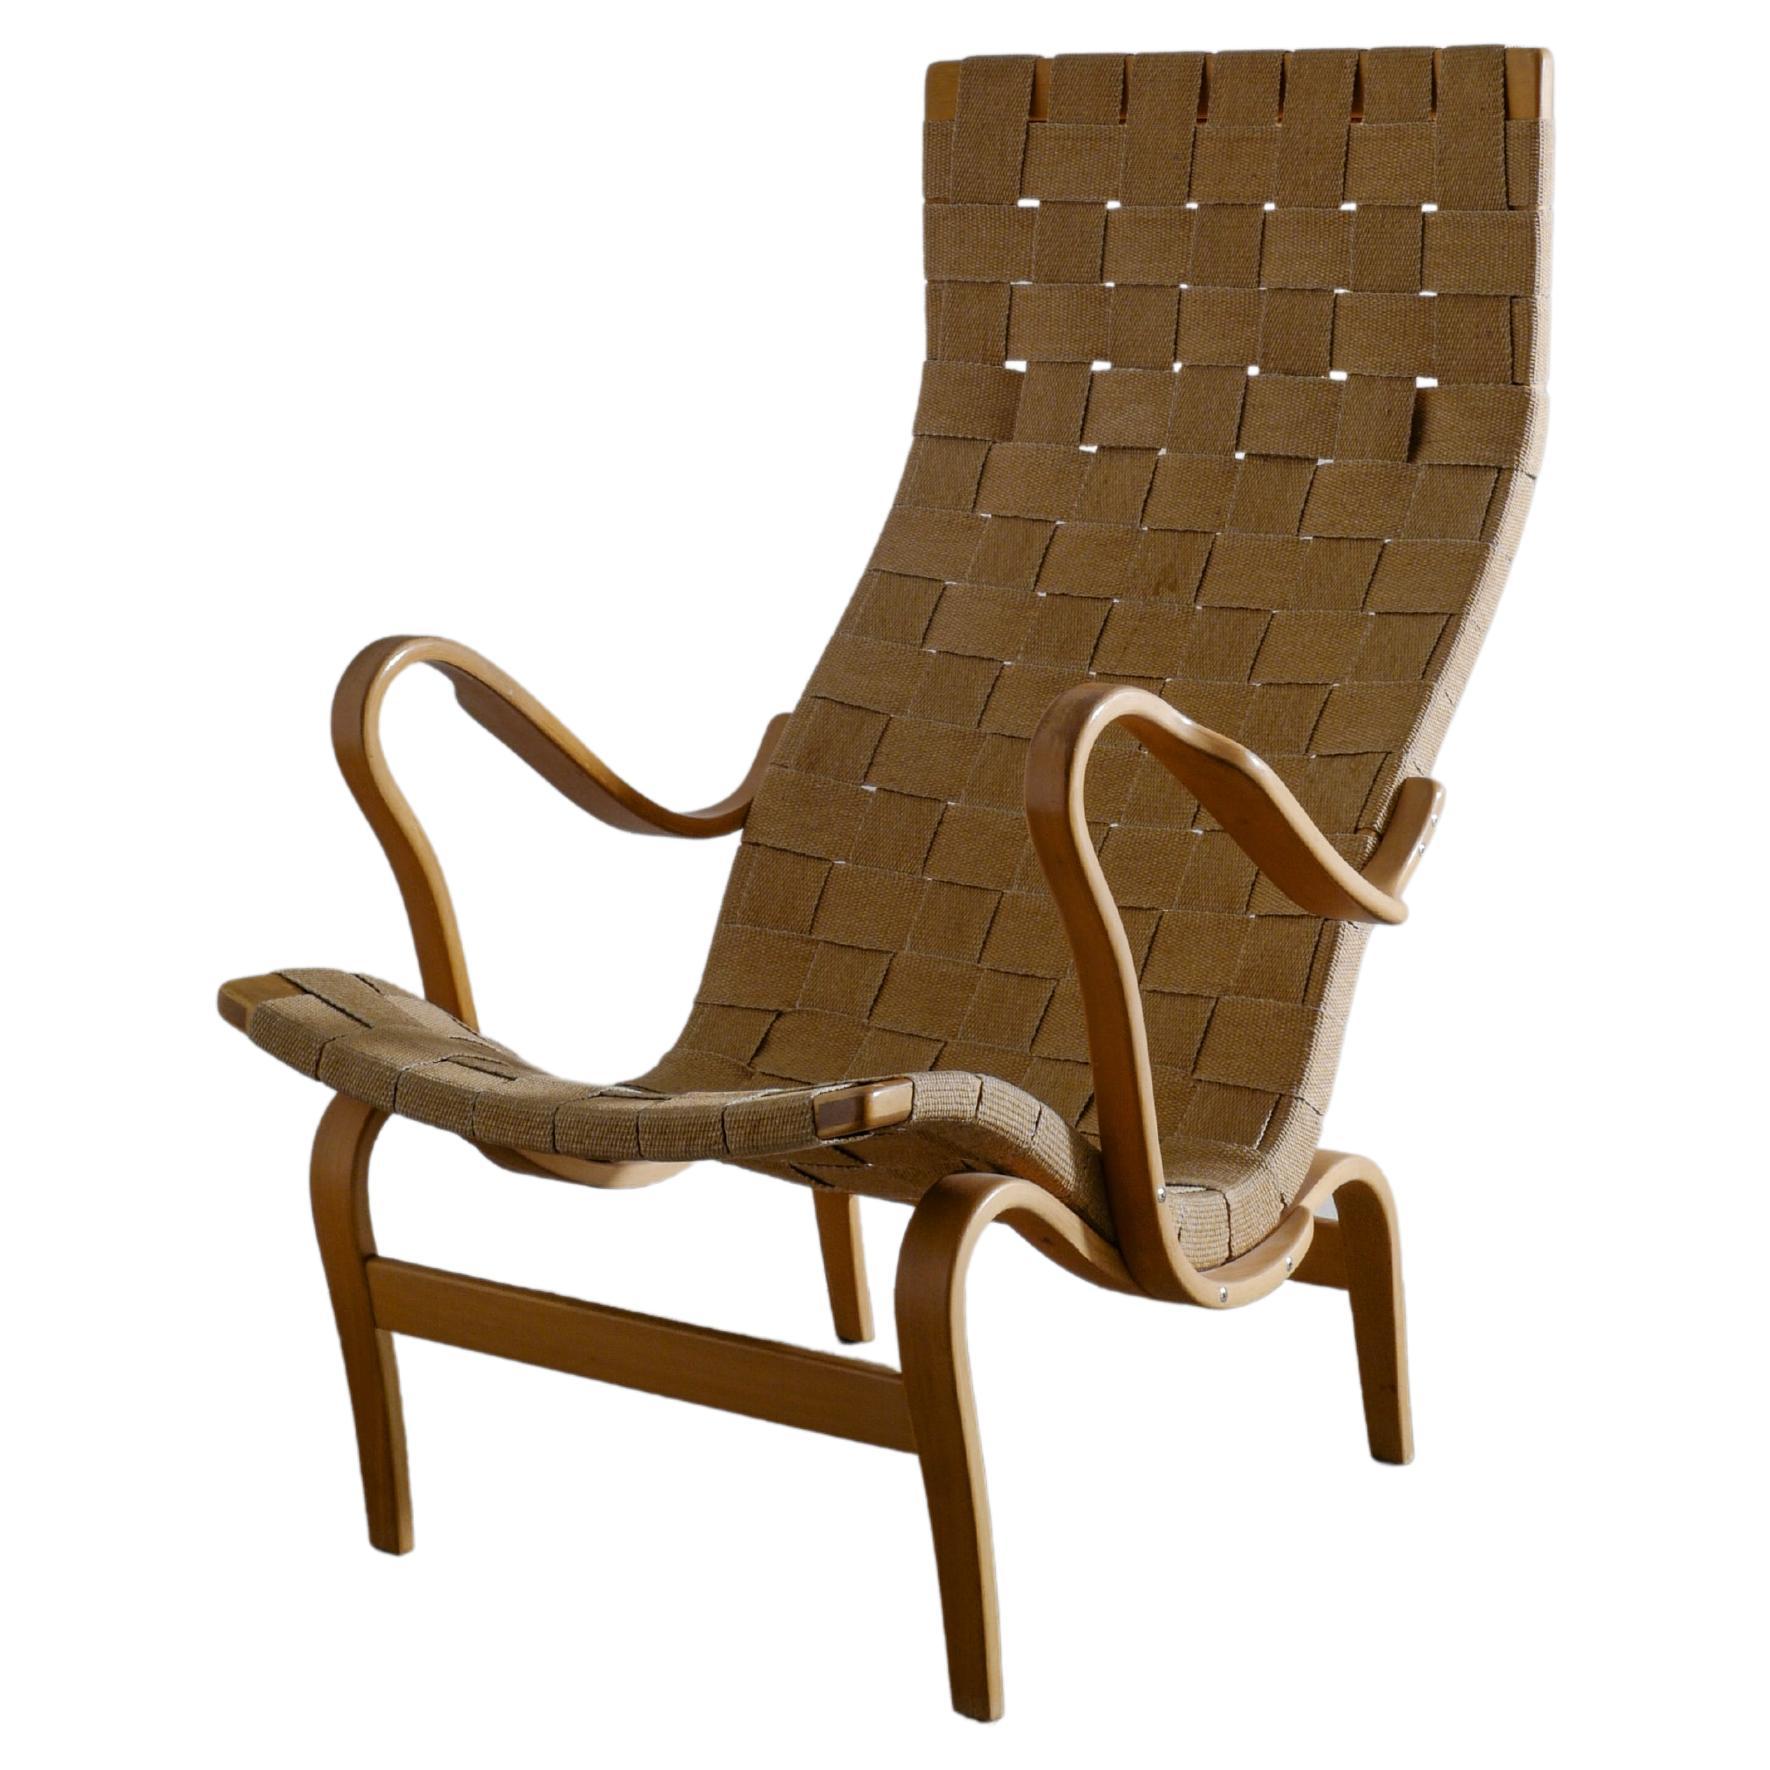 Bruno Mathsson "Pernilla" Lounge Arm Chair in Beech Produced in Sweden, 1962